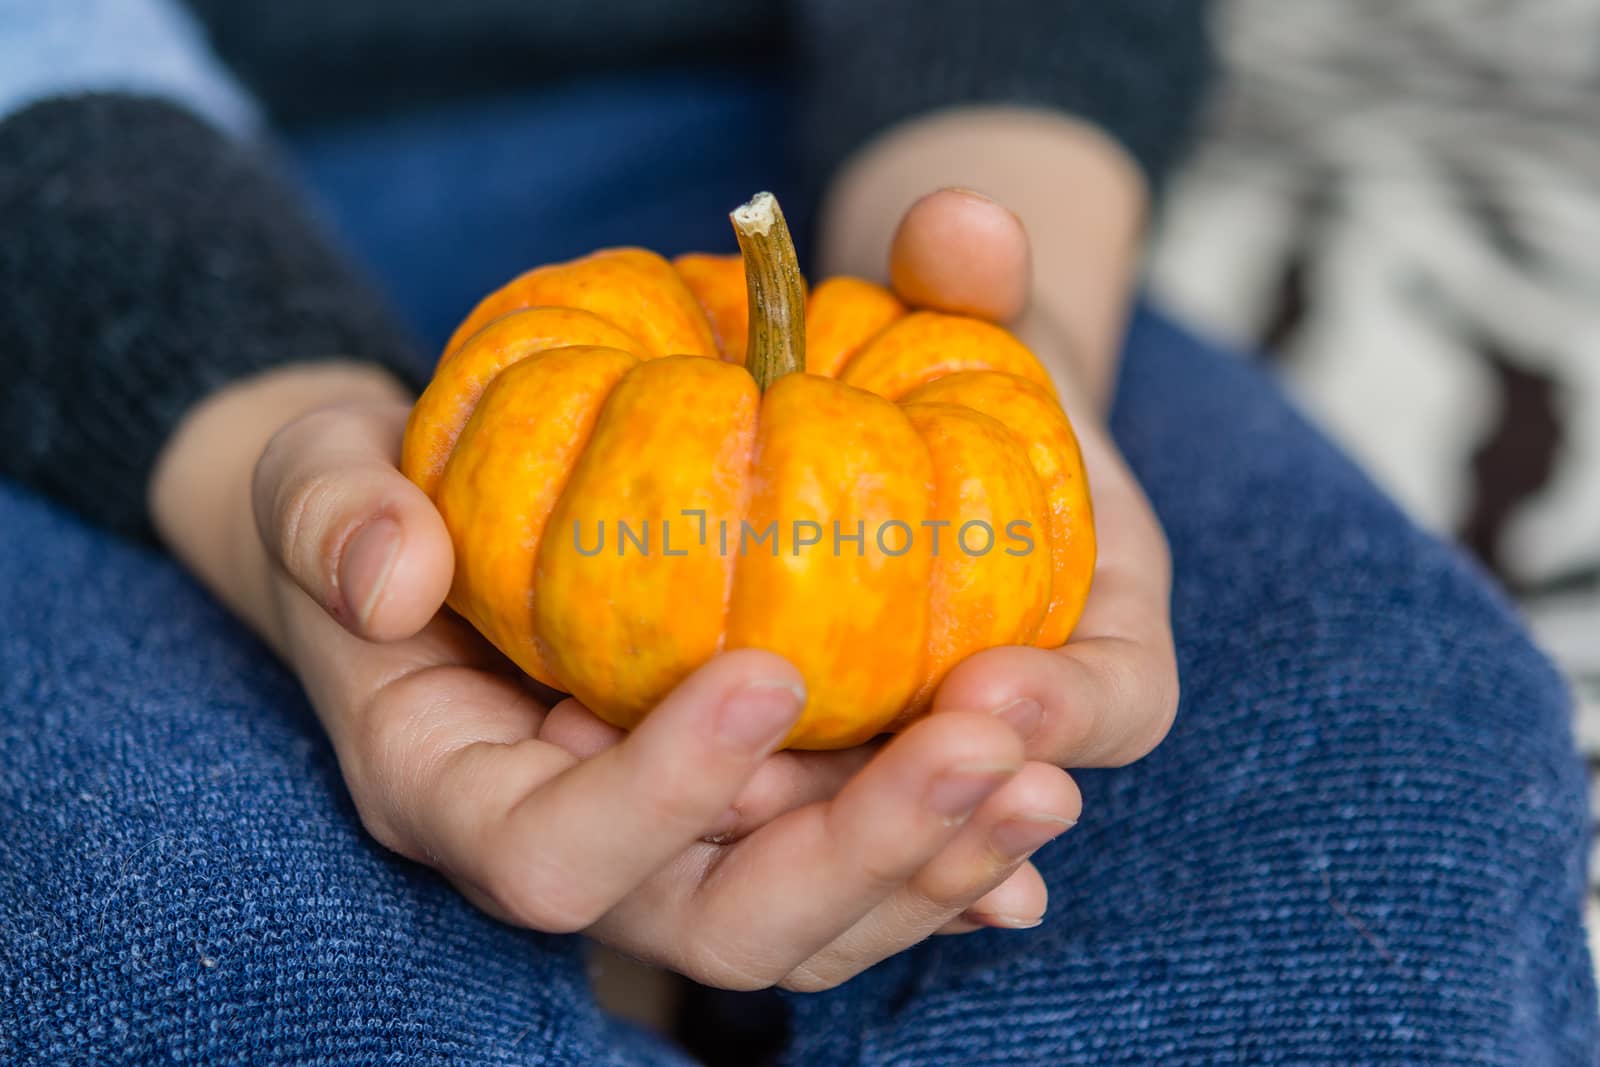 A girl holds a small orange pumpkin on her lap.